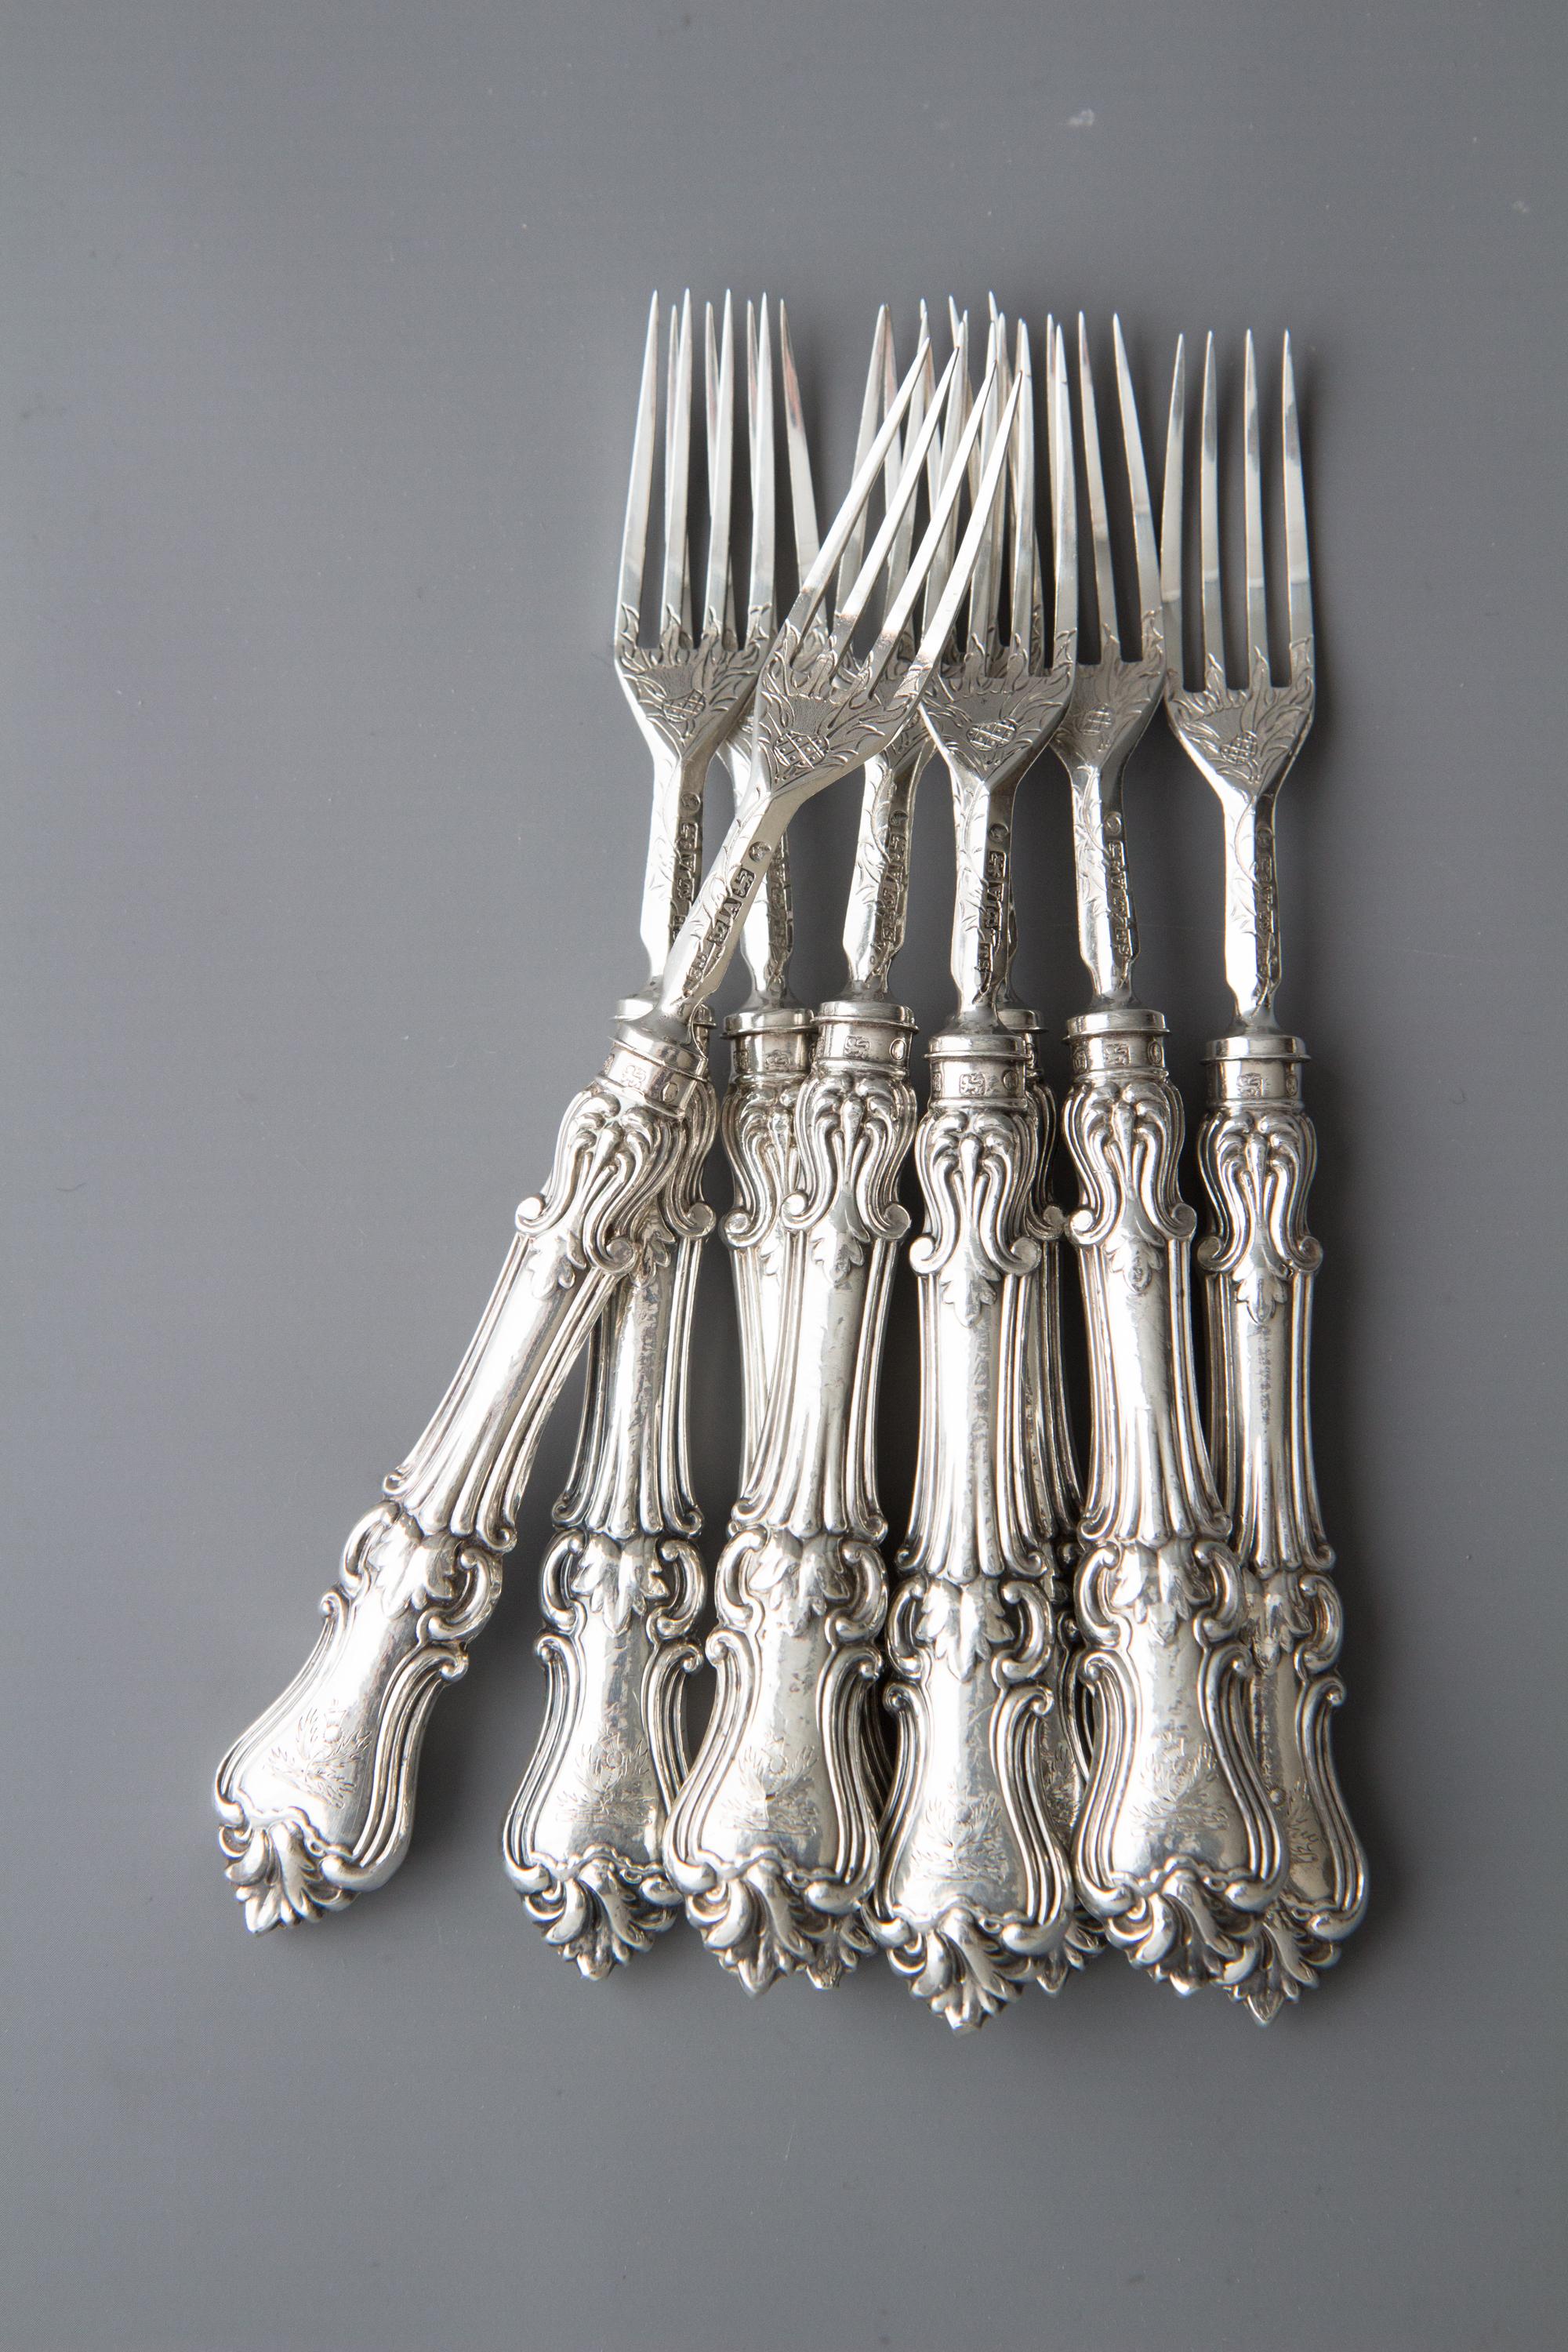 A very good set of Victorian silver fruit or dessert knives and forks for eight people. Each knife blade and each fork engraved with the thistle and the rose. This is probably in reference to the famous Scottish poem. The filled silver handled